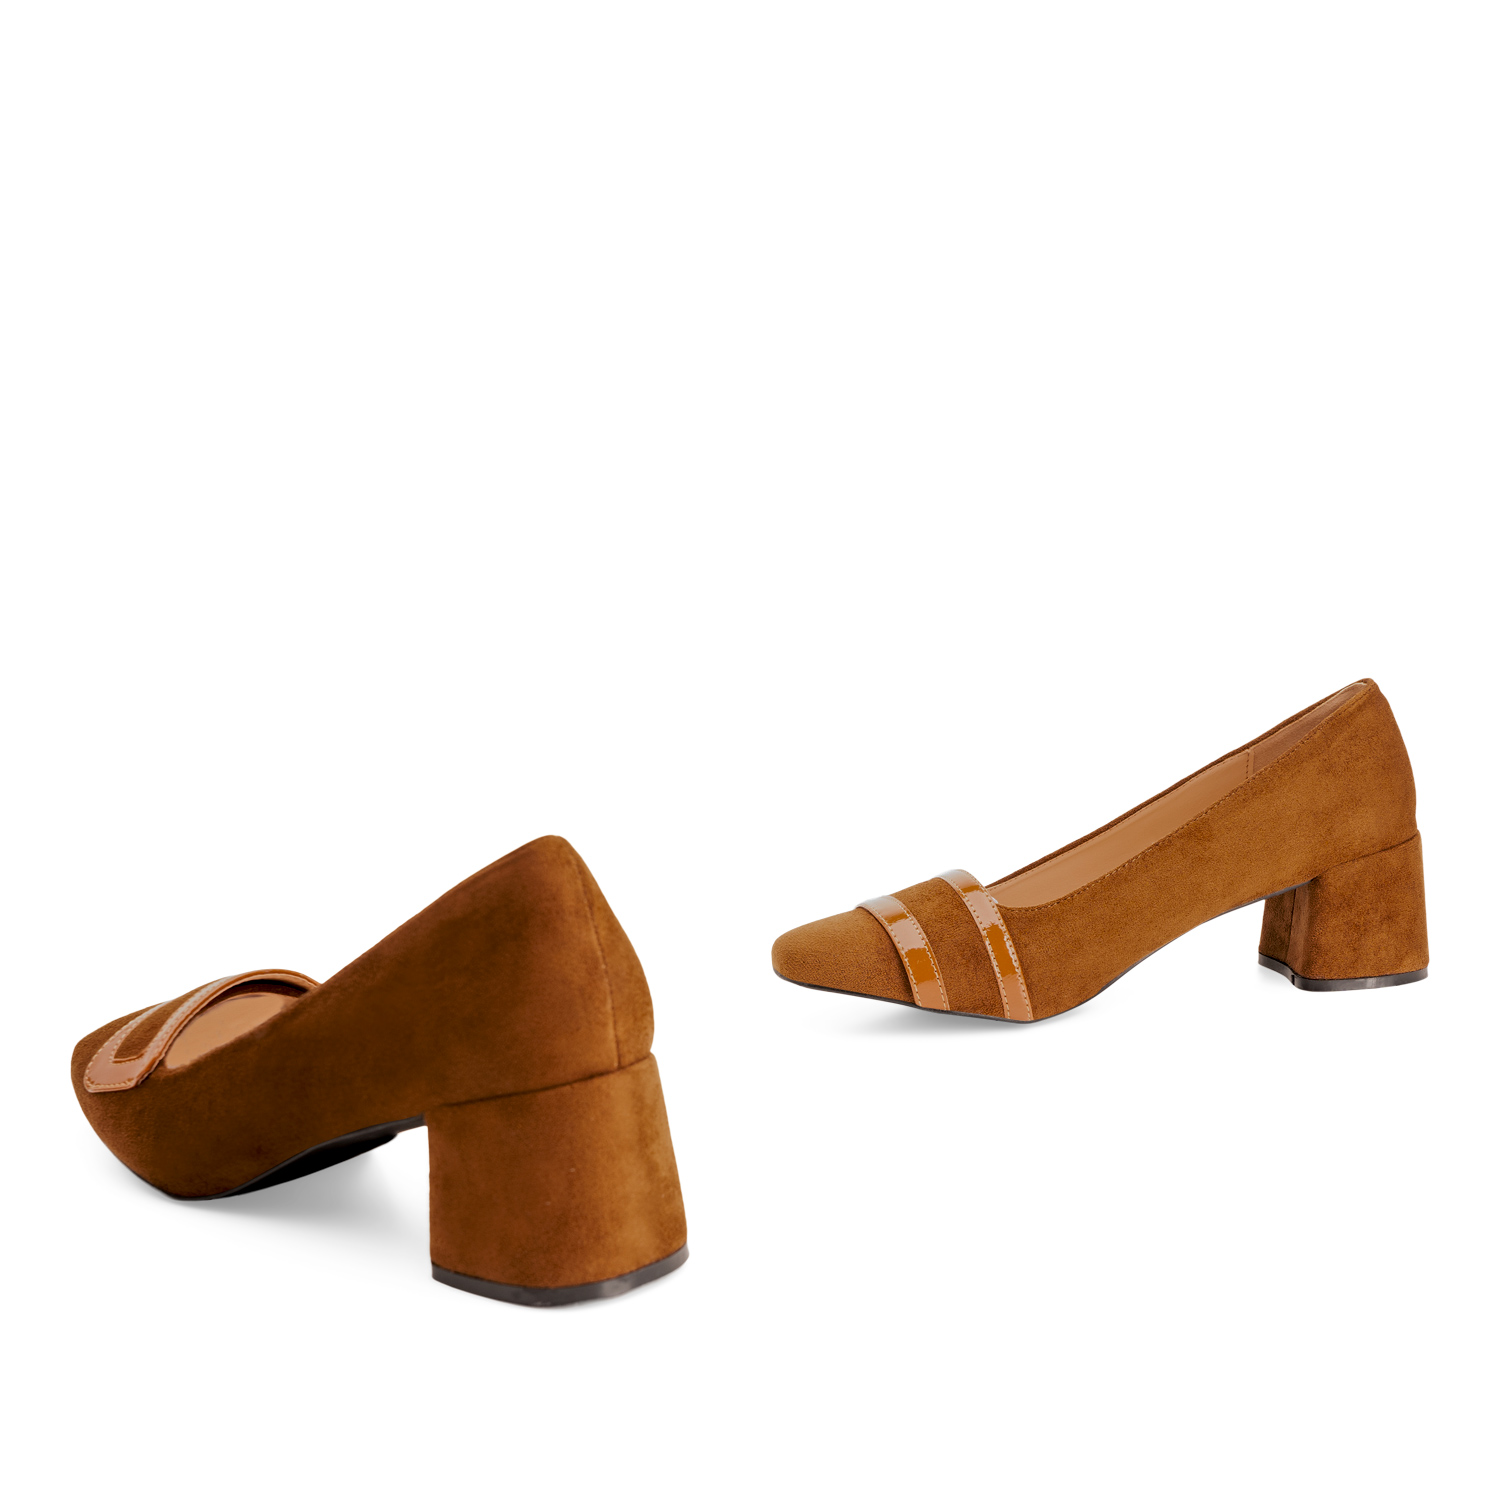 Heeled shoes in camel colored faux suede 